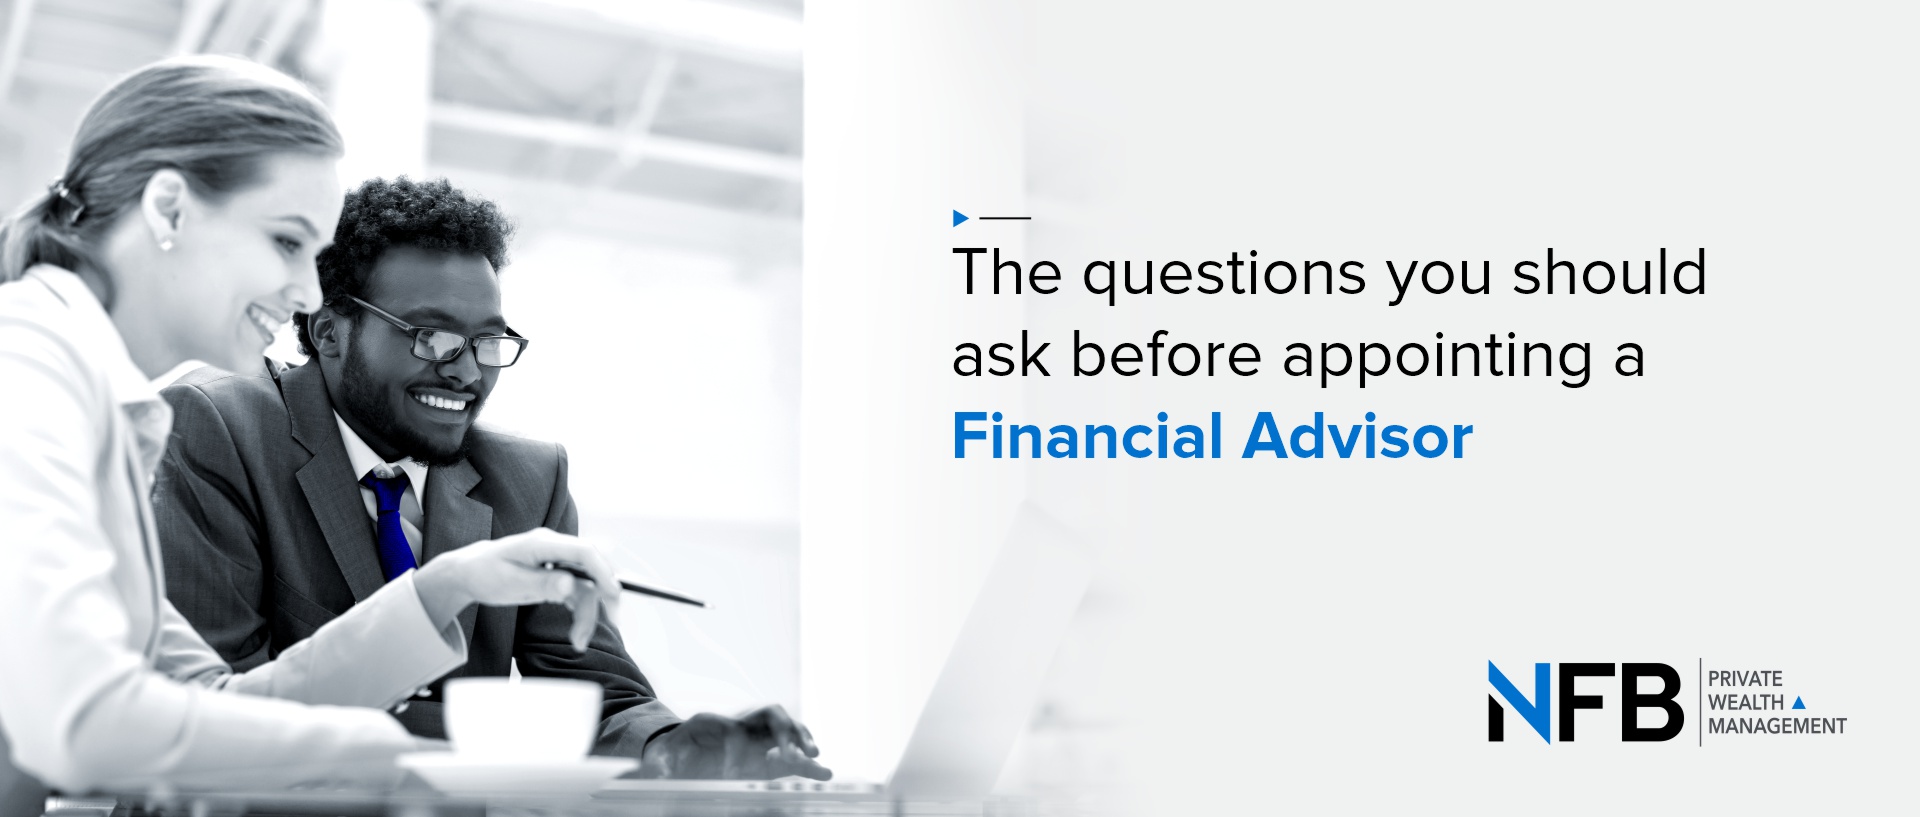 The questions you should ask before appointing a Financial Advisor